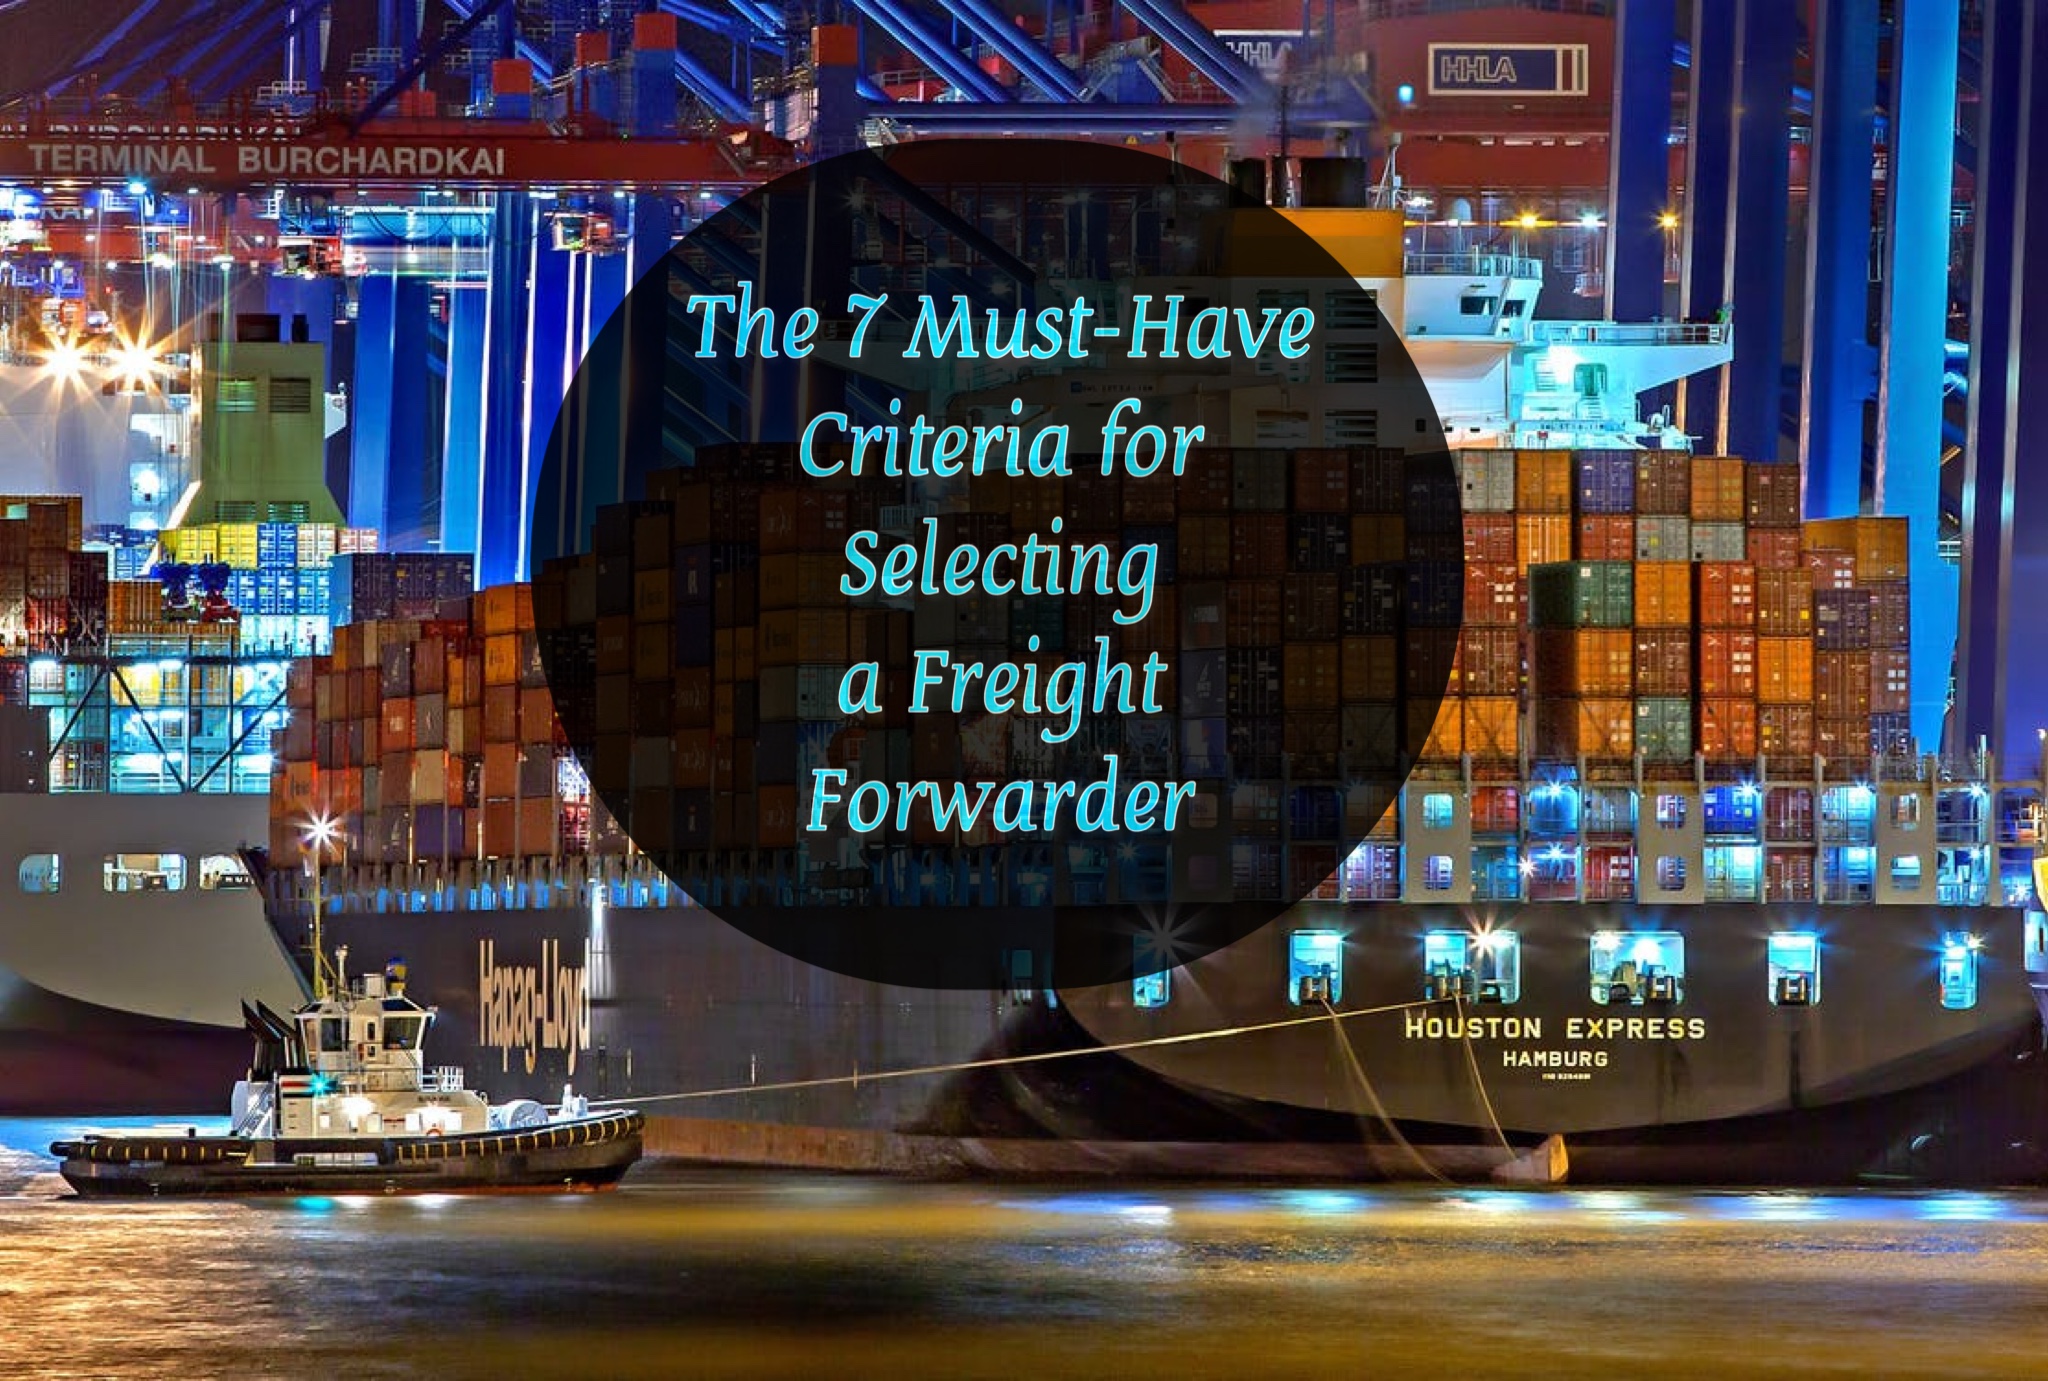 The 7 Must-Have Criteria for Selecting a Freight Forwarder